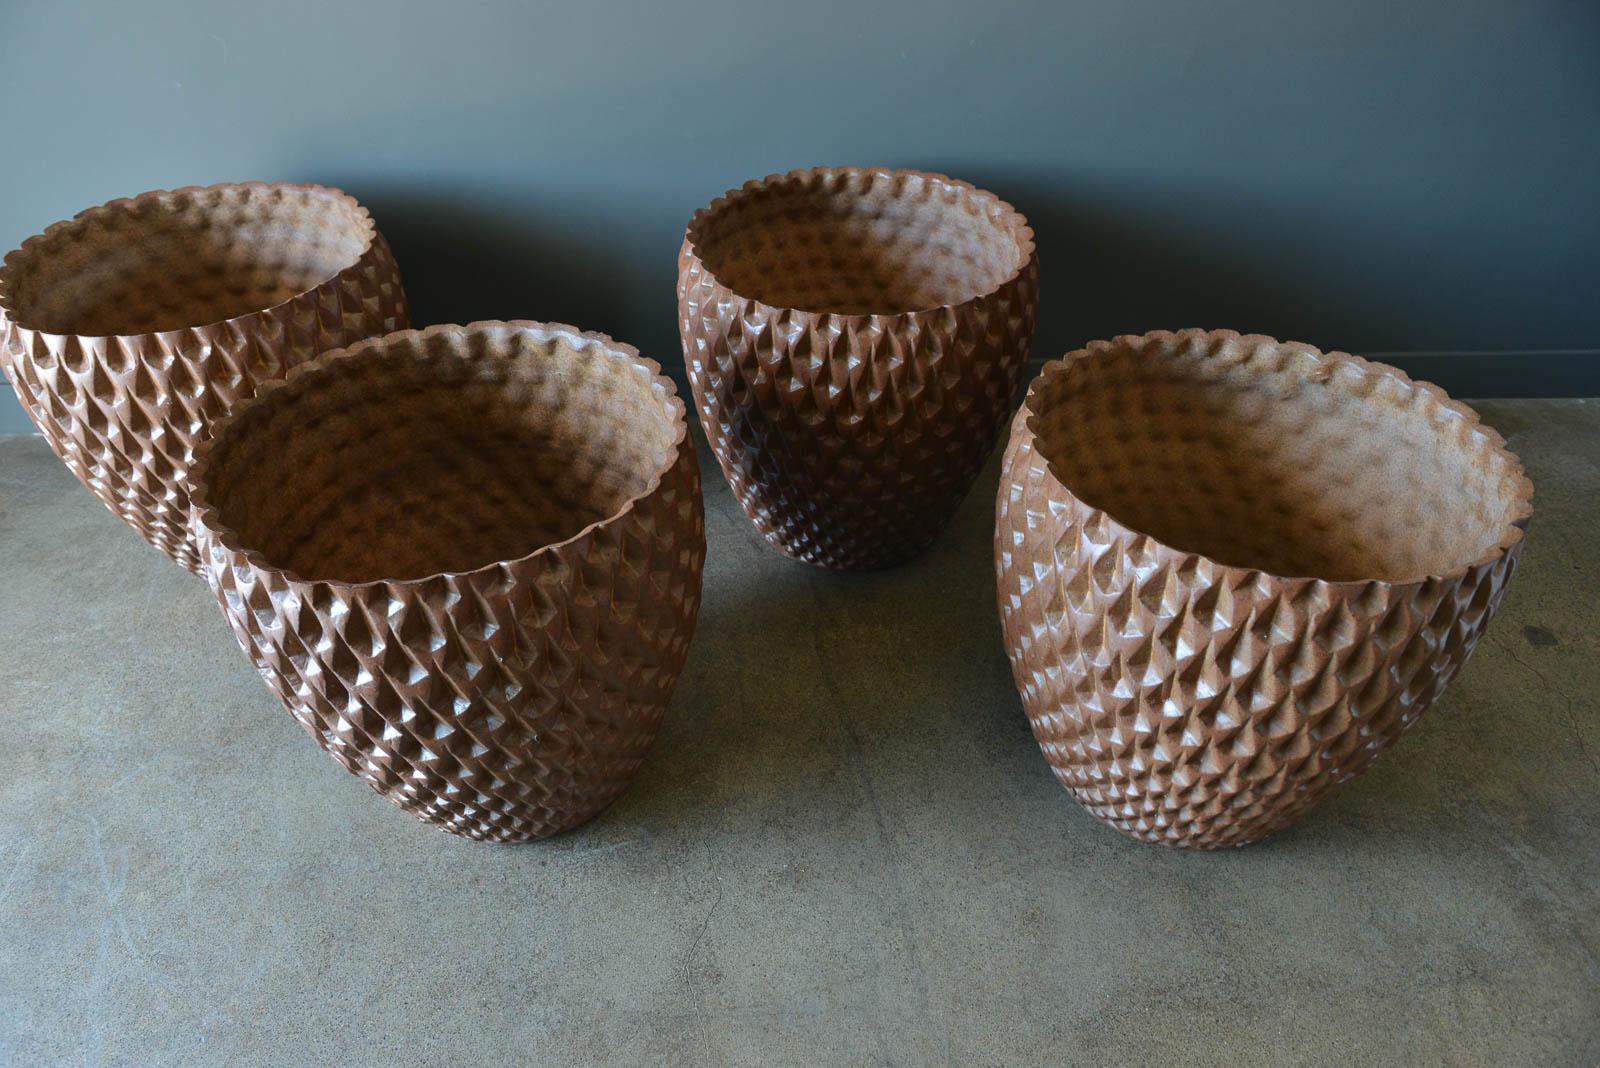 American Phoenix-1 Stoneware Planters by David Cressey for Architectural Pottery, 1977